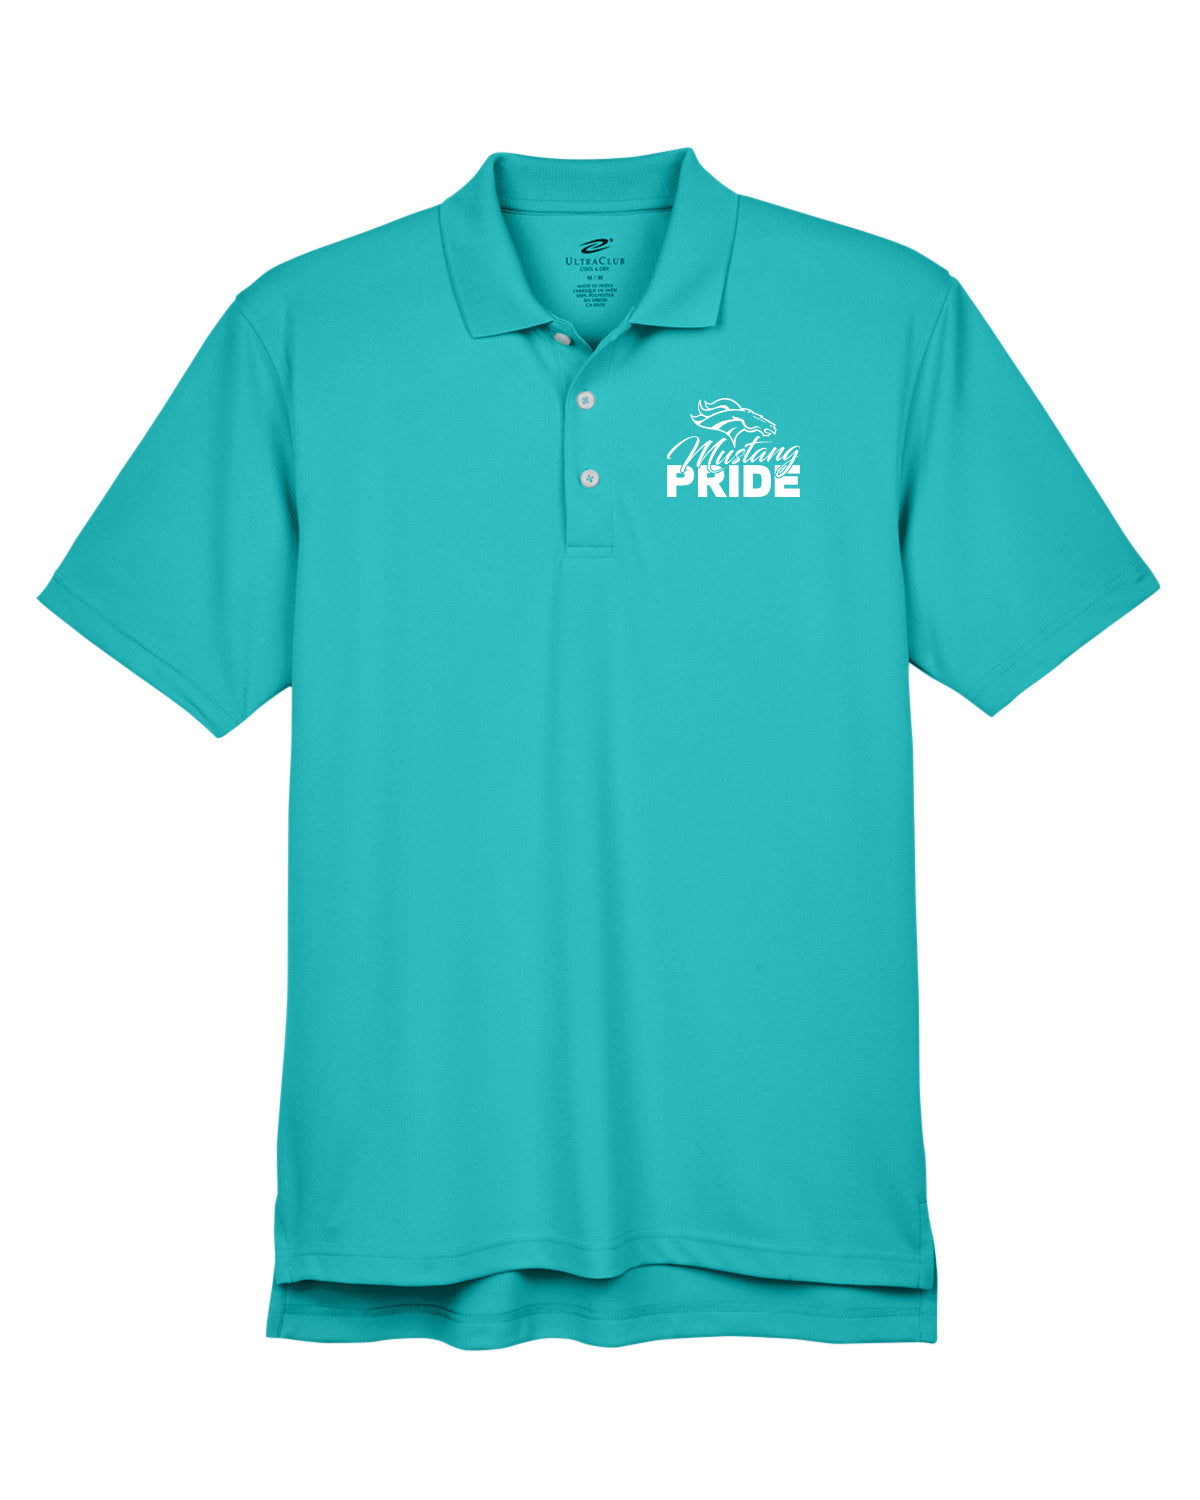 8445- HEMPSTEAD STAFF UltraClub Men's Cool & Dry Stain-Release Performance Polo